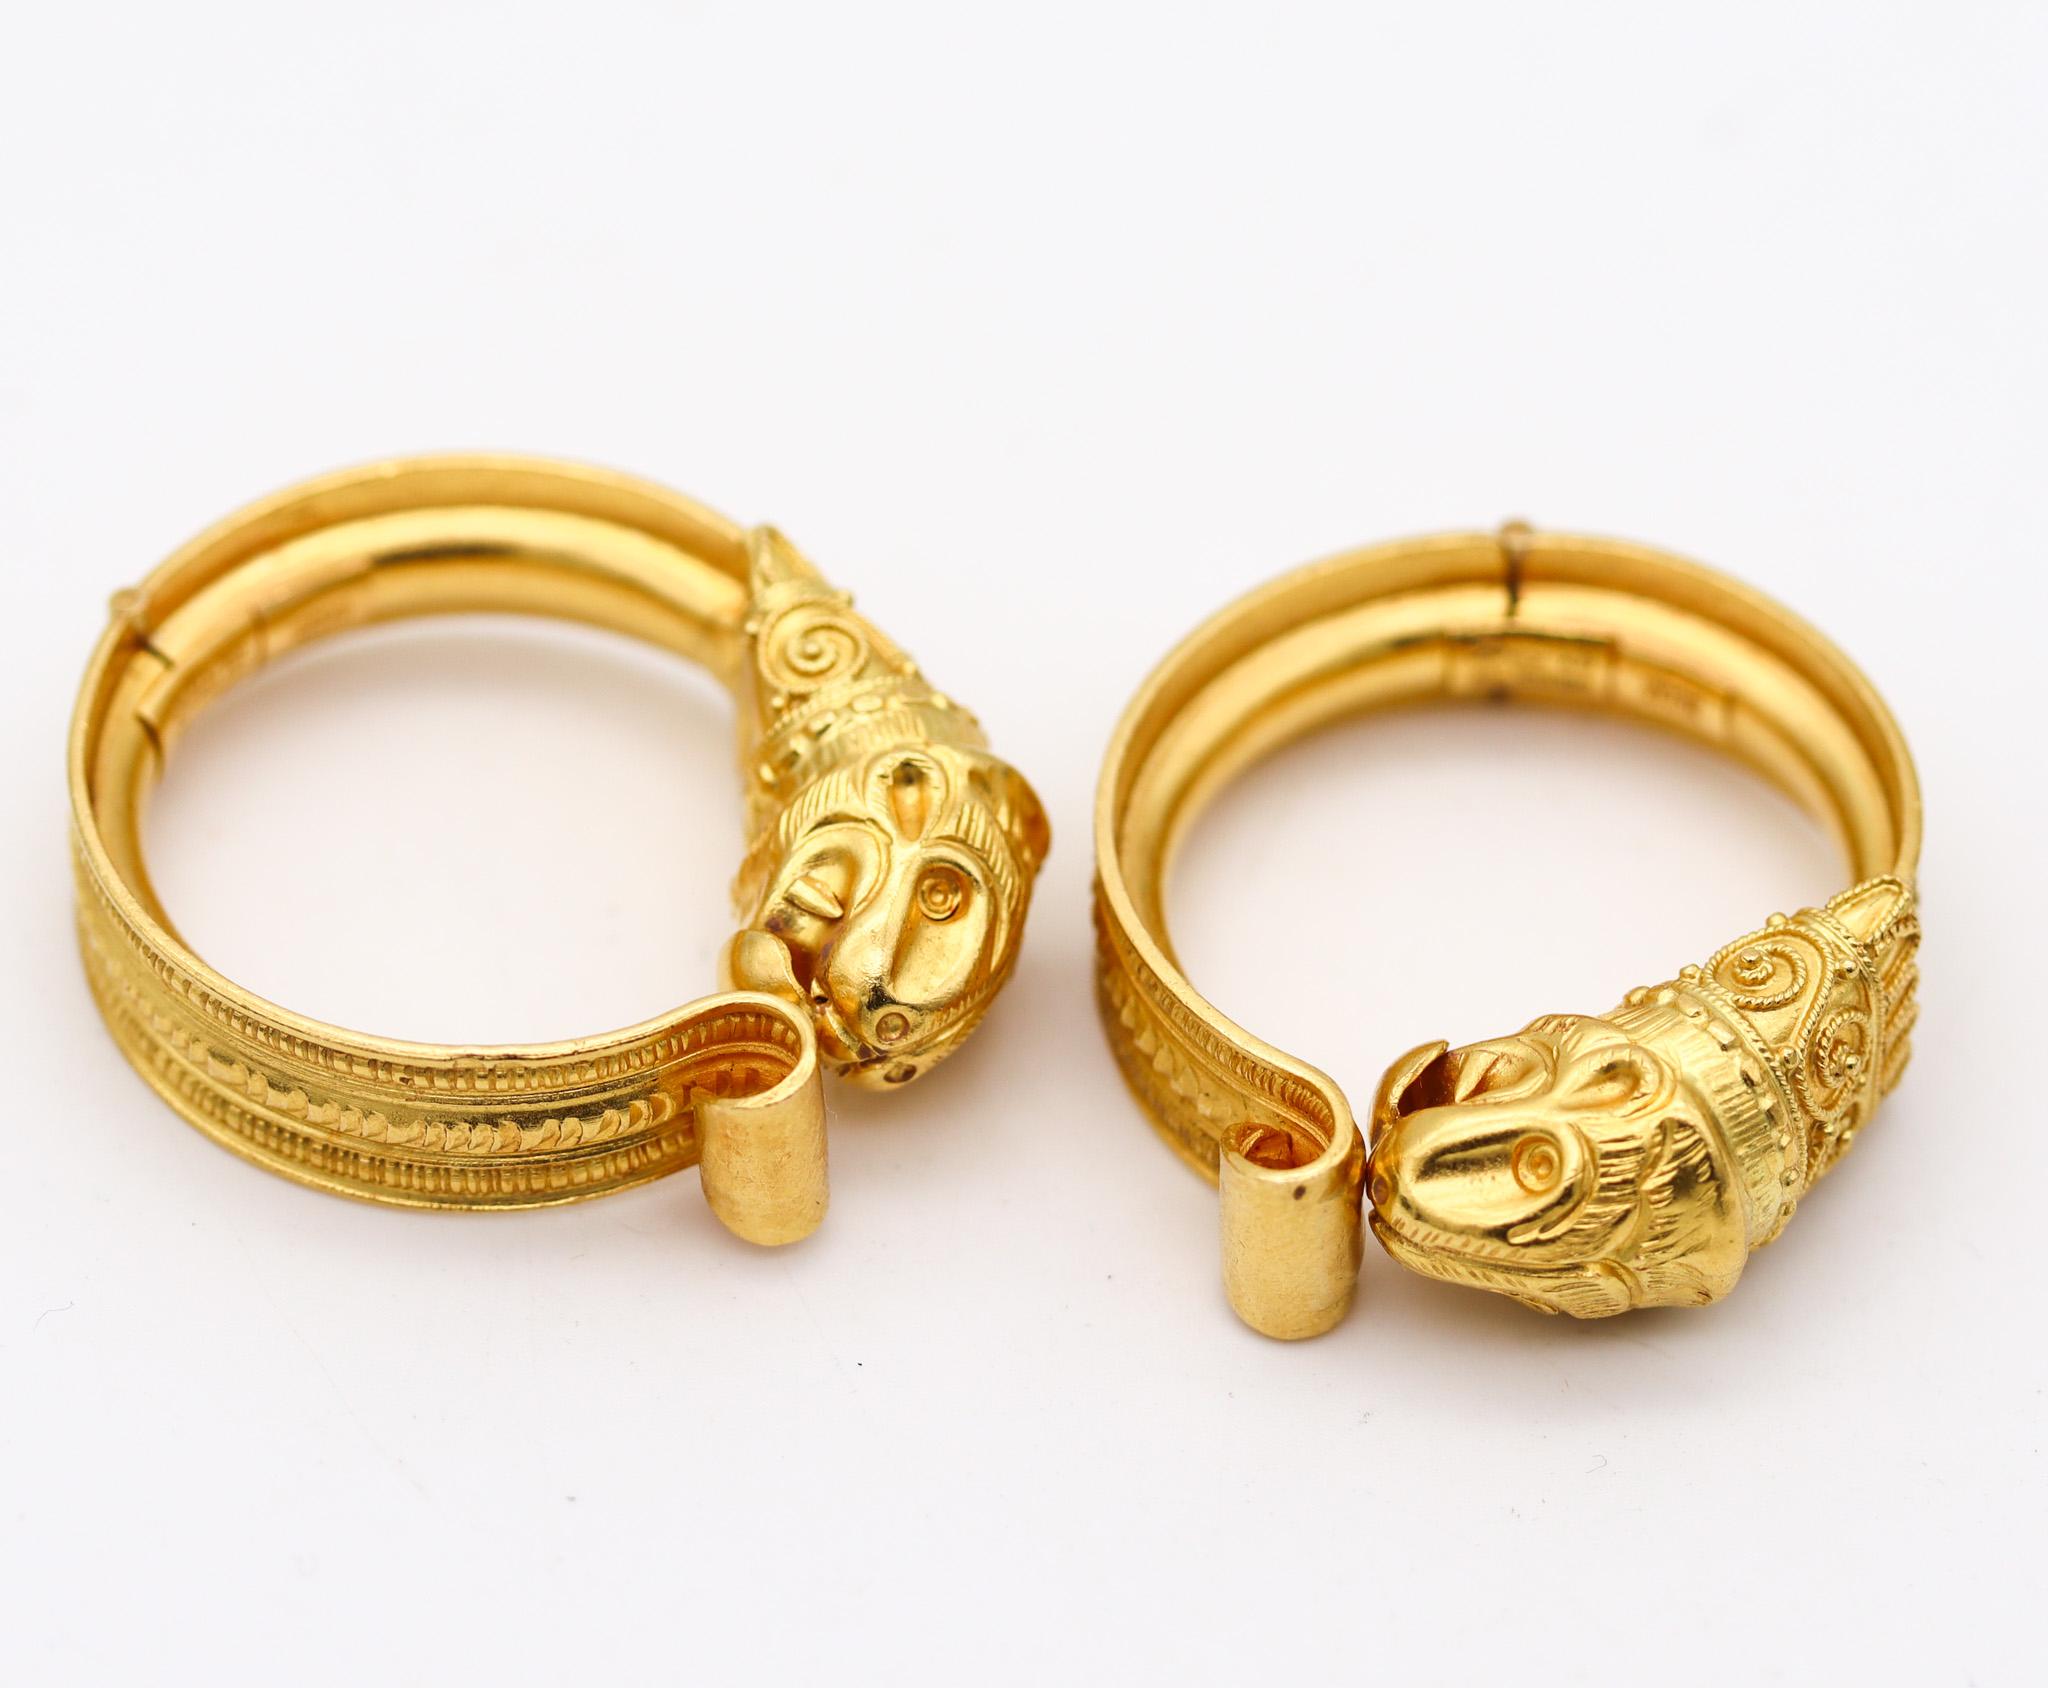 Lalaounis 1970 Paris Hellenistic Hoops Earrings In Solid 18Kt Yellow Gold In Excellent Condition For Sale In Miami, FL